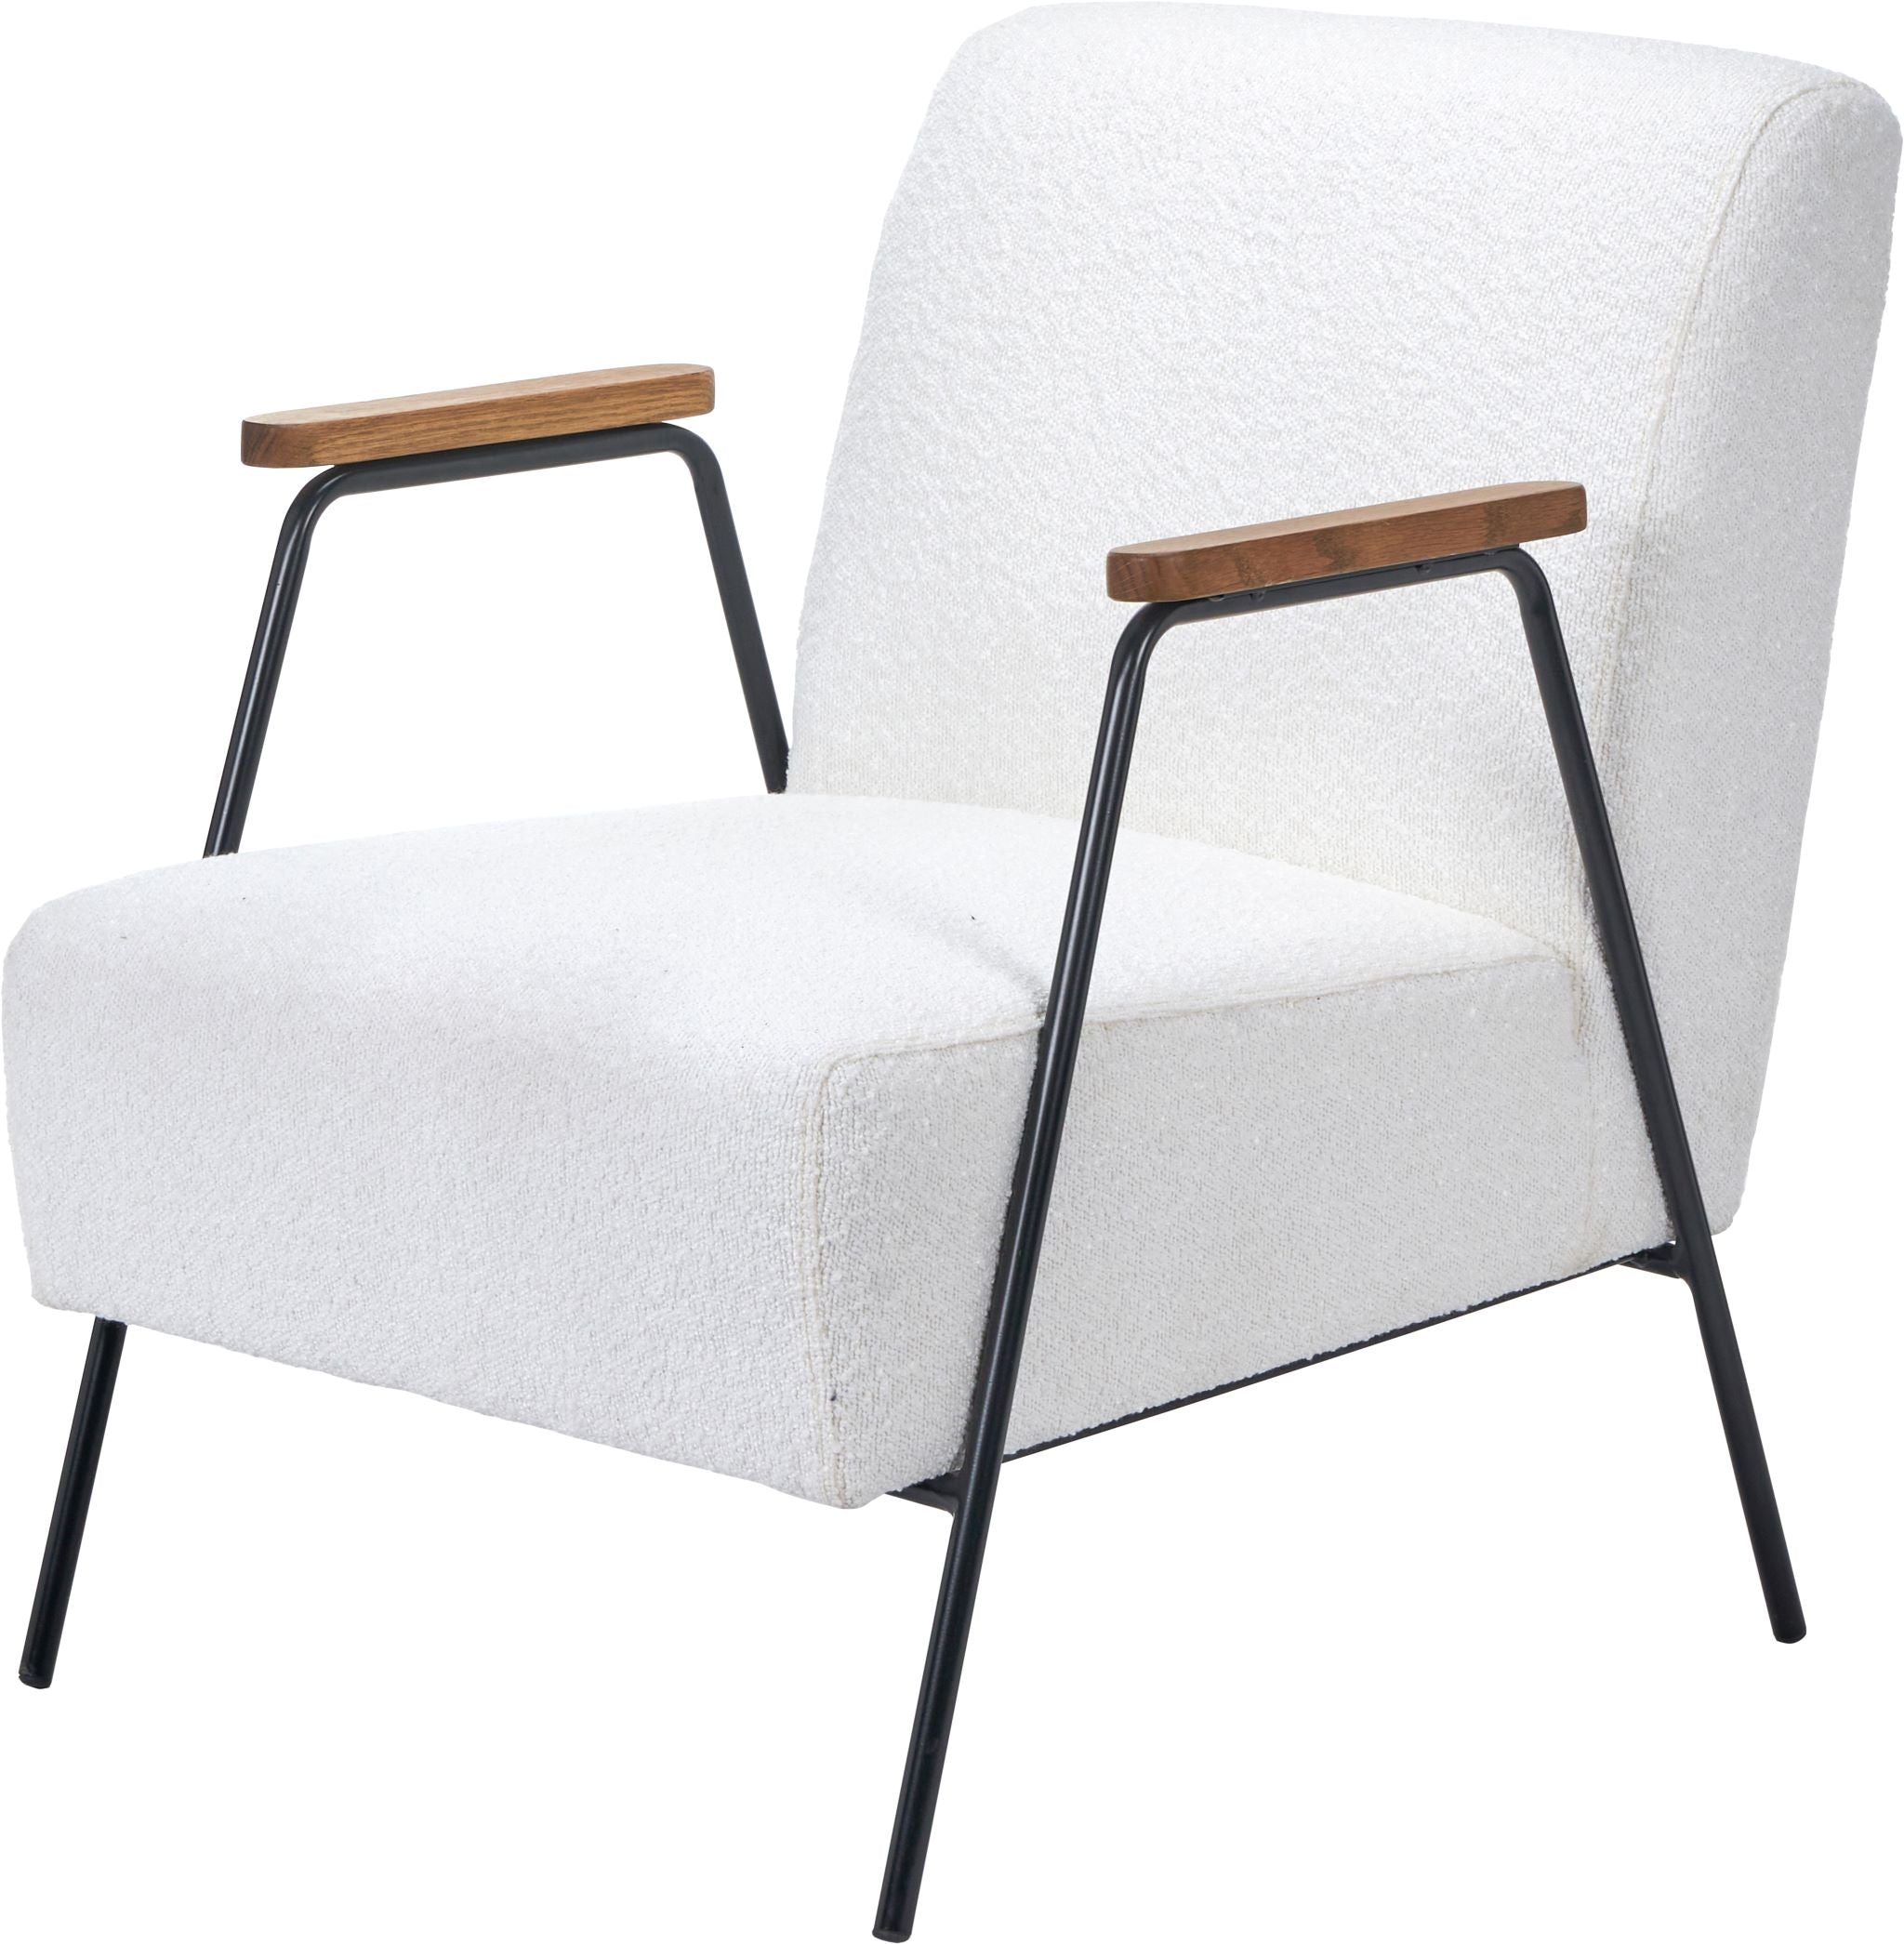 Matera Bouclé Chair With Black Legs and Wooden Arms